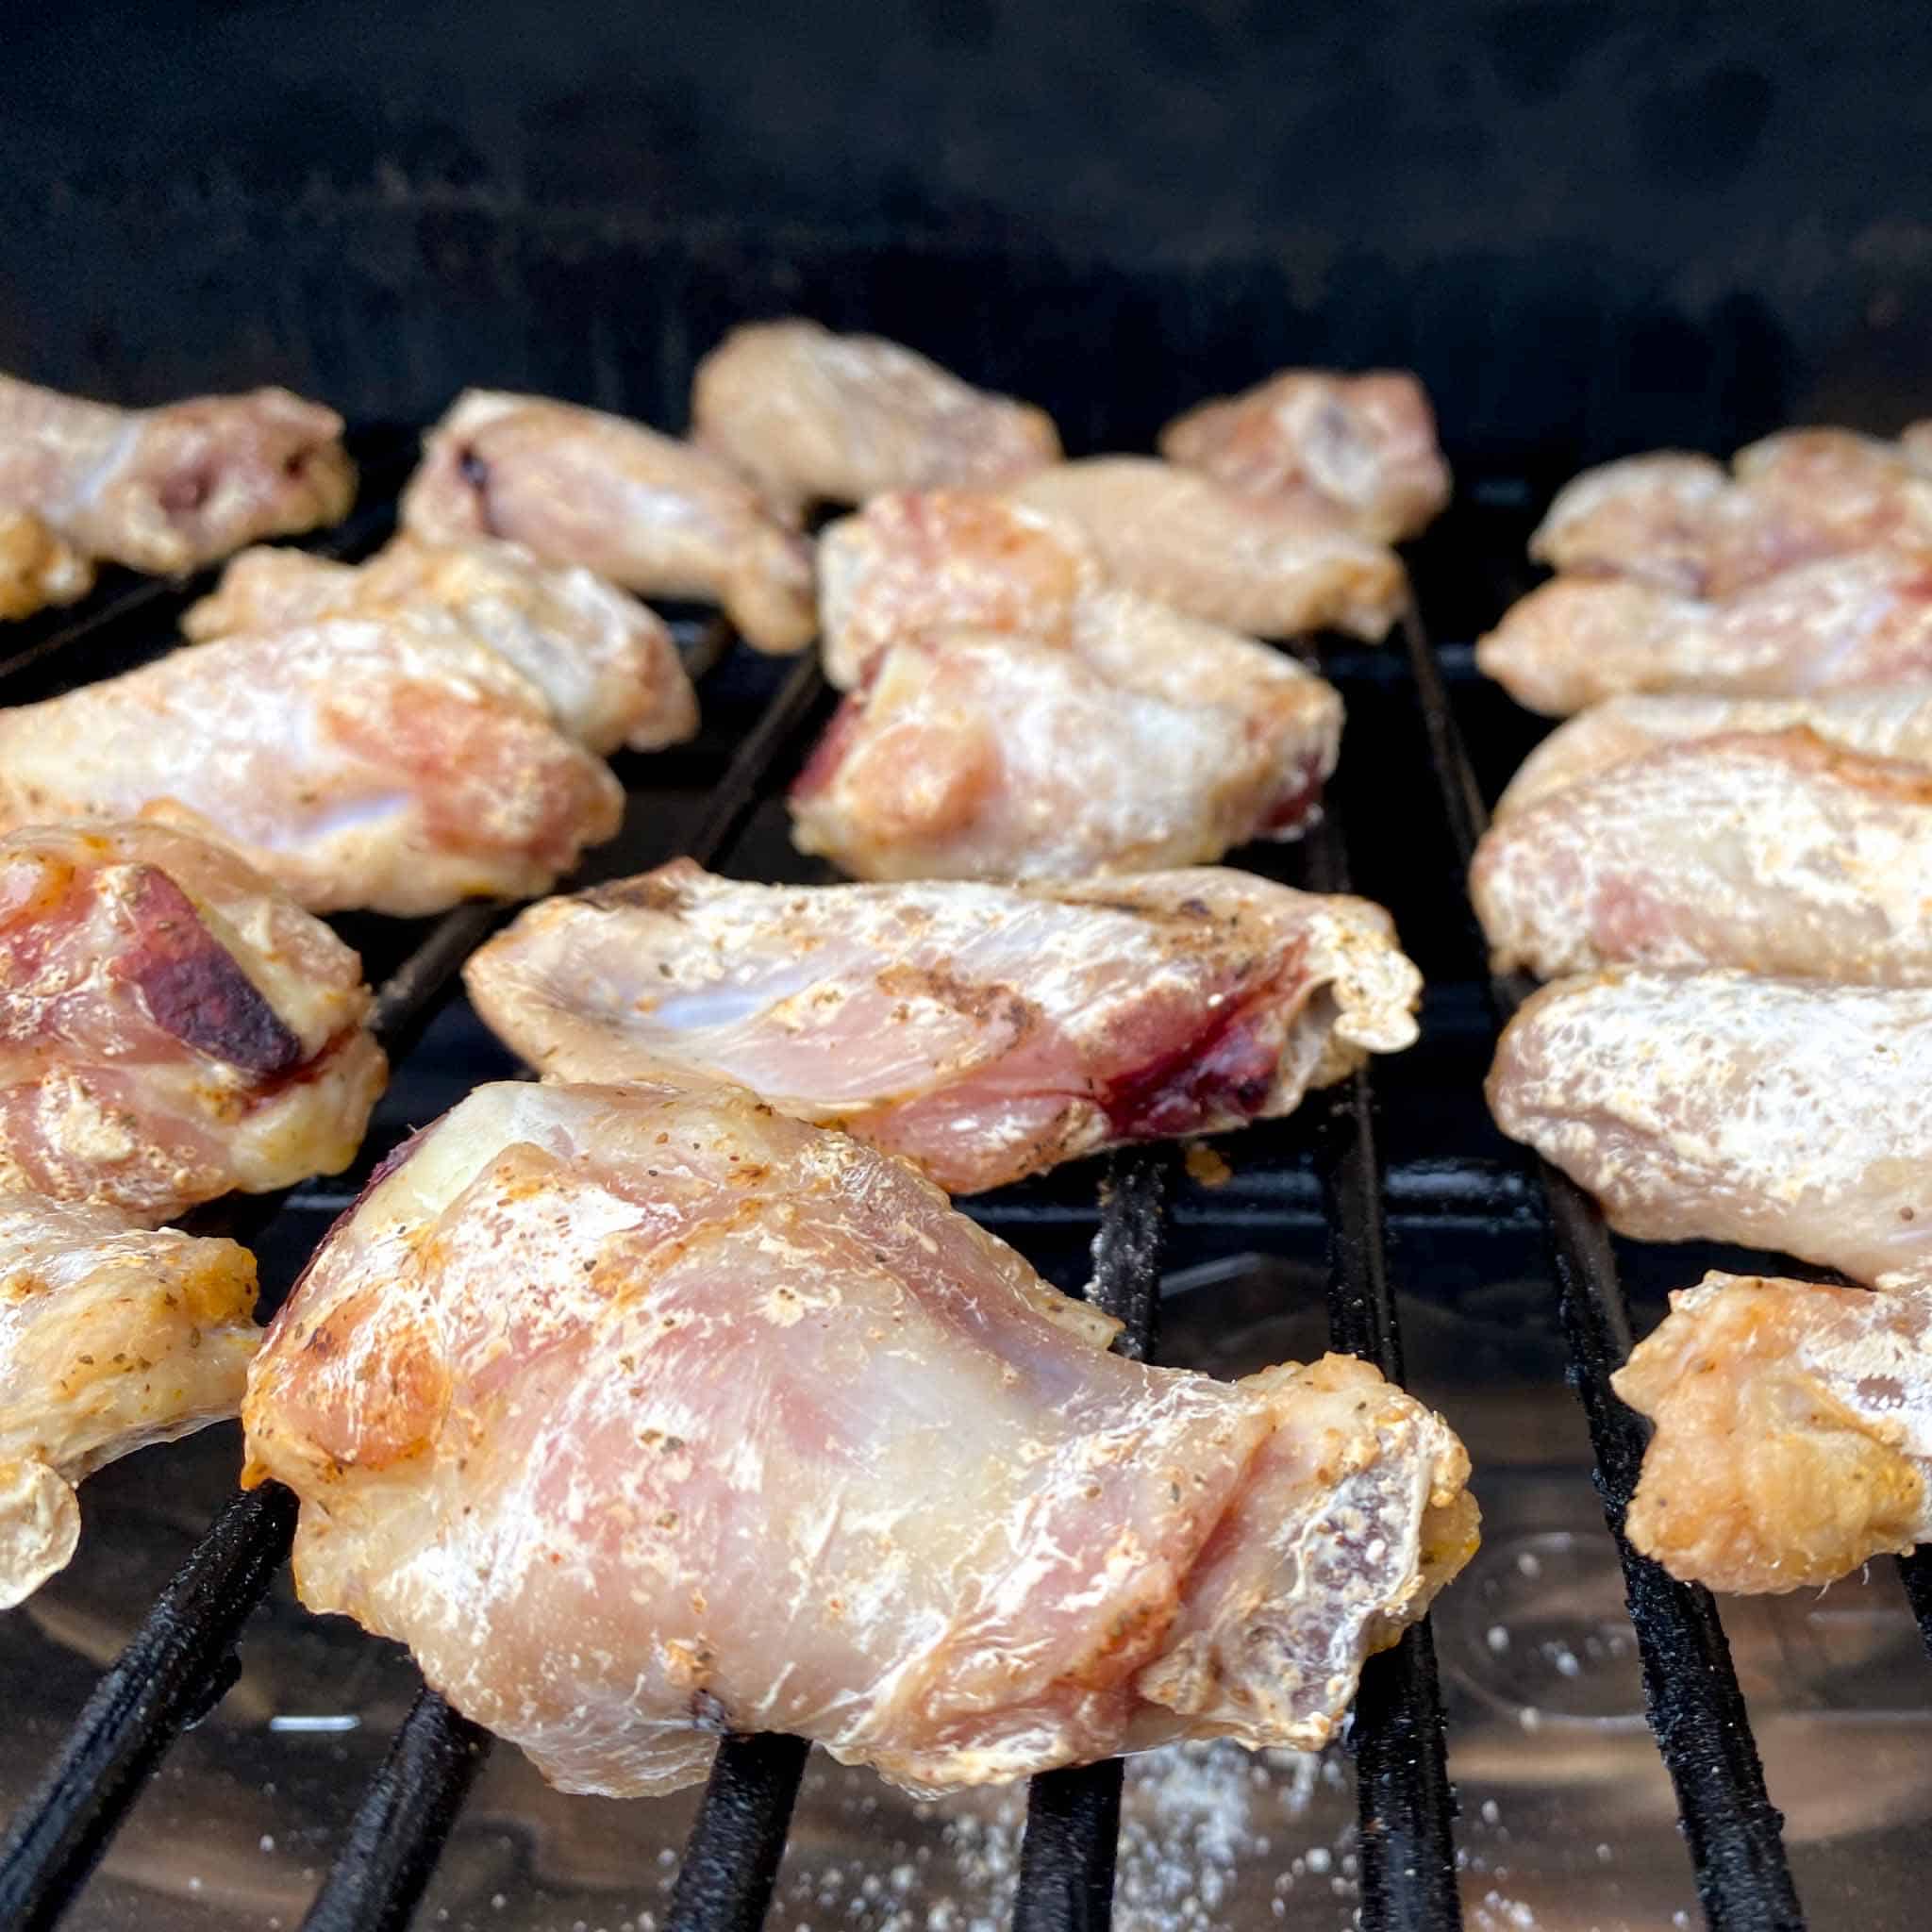 Partially cooked wings on a traeger pellet grill.